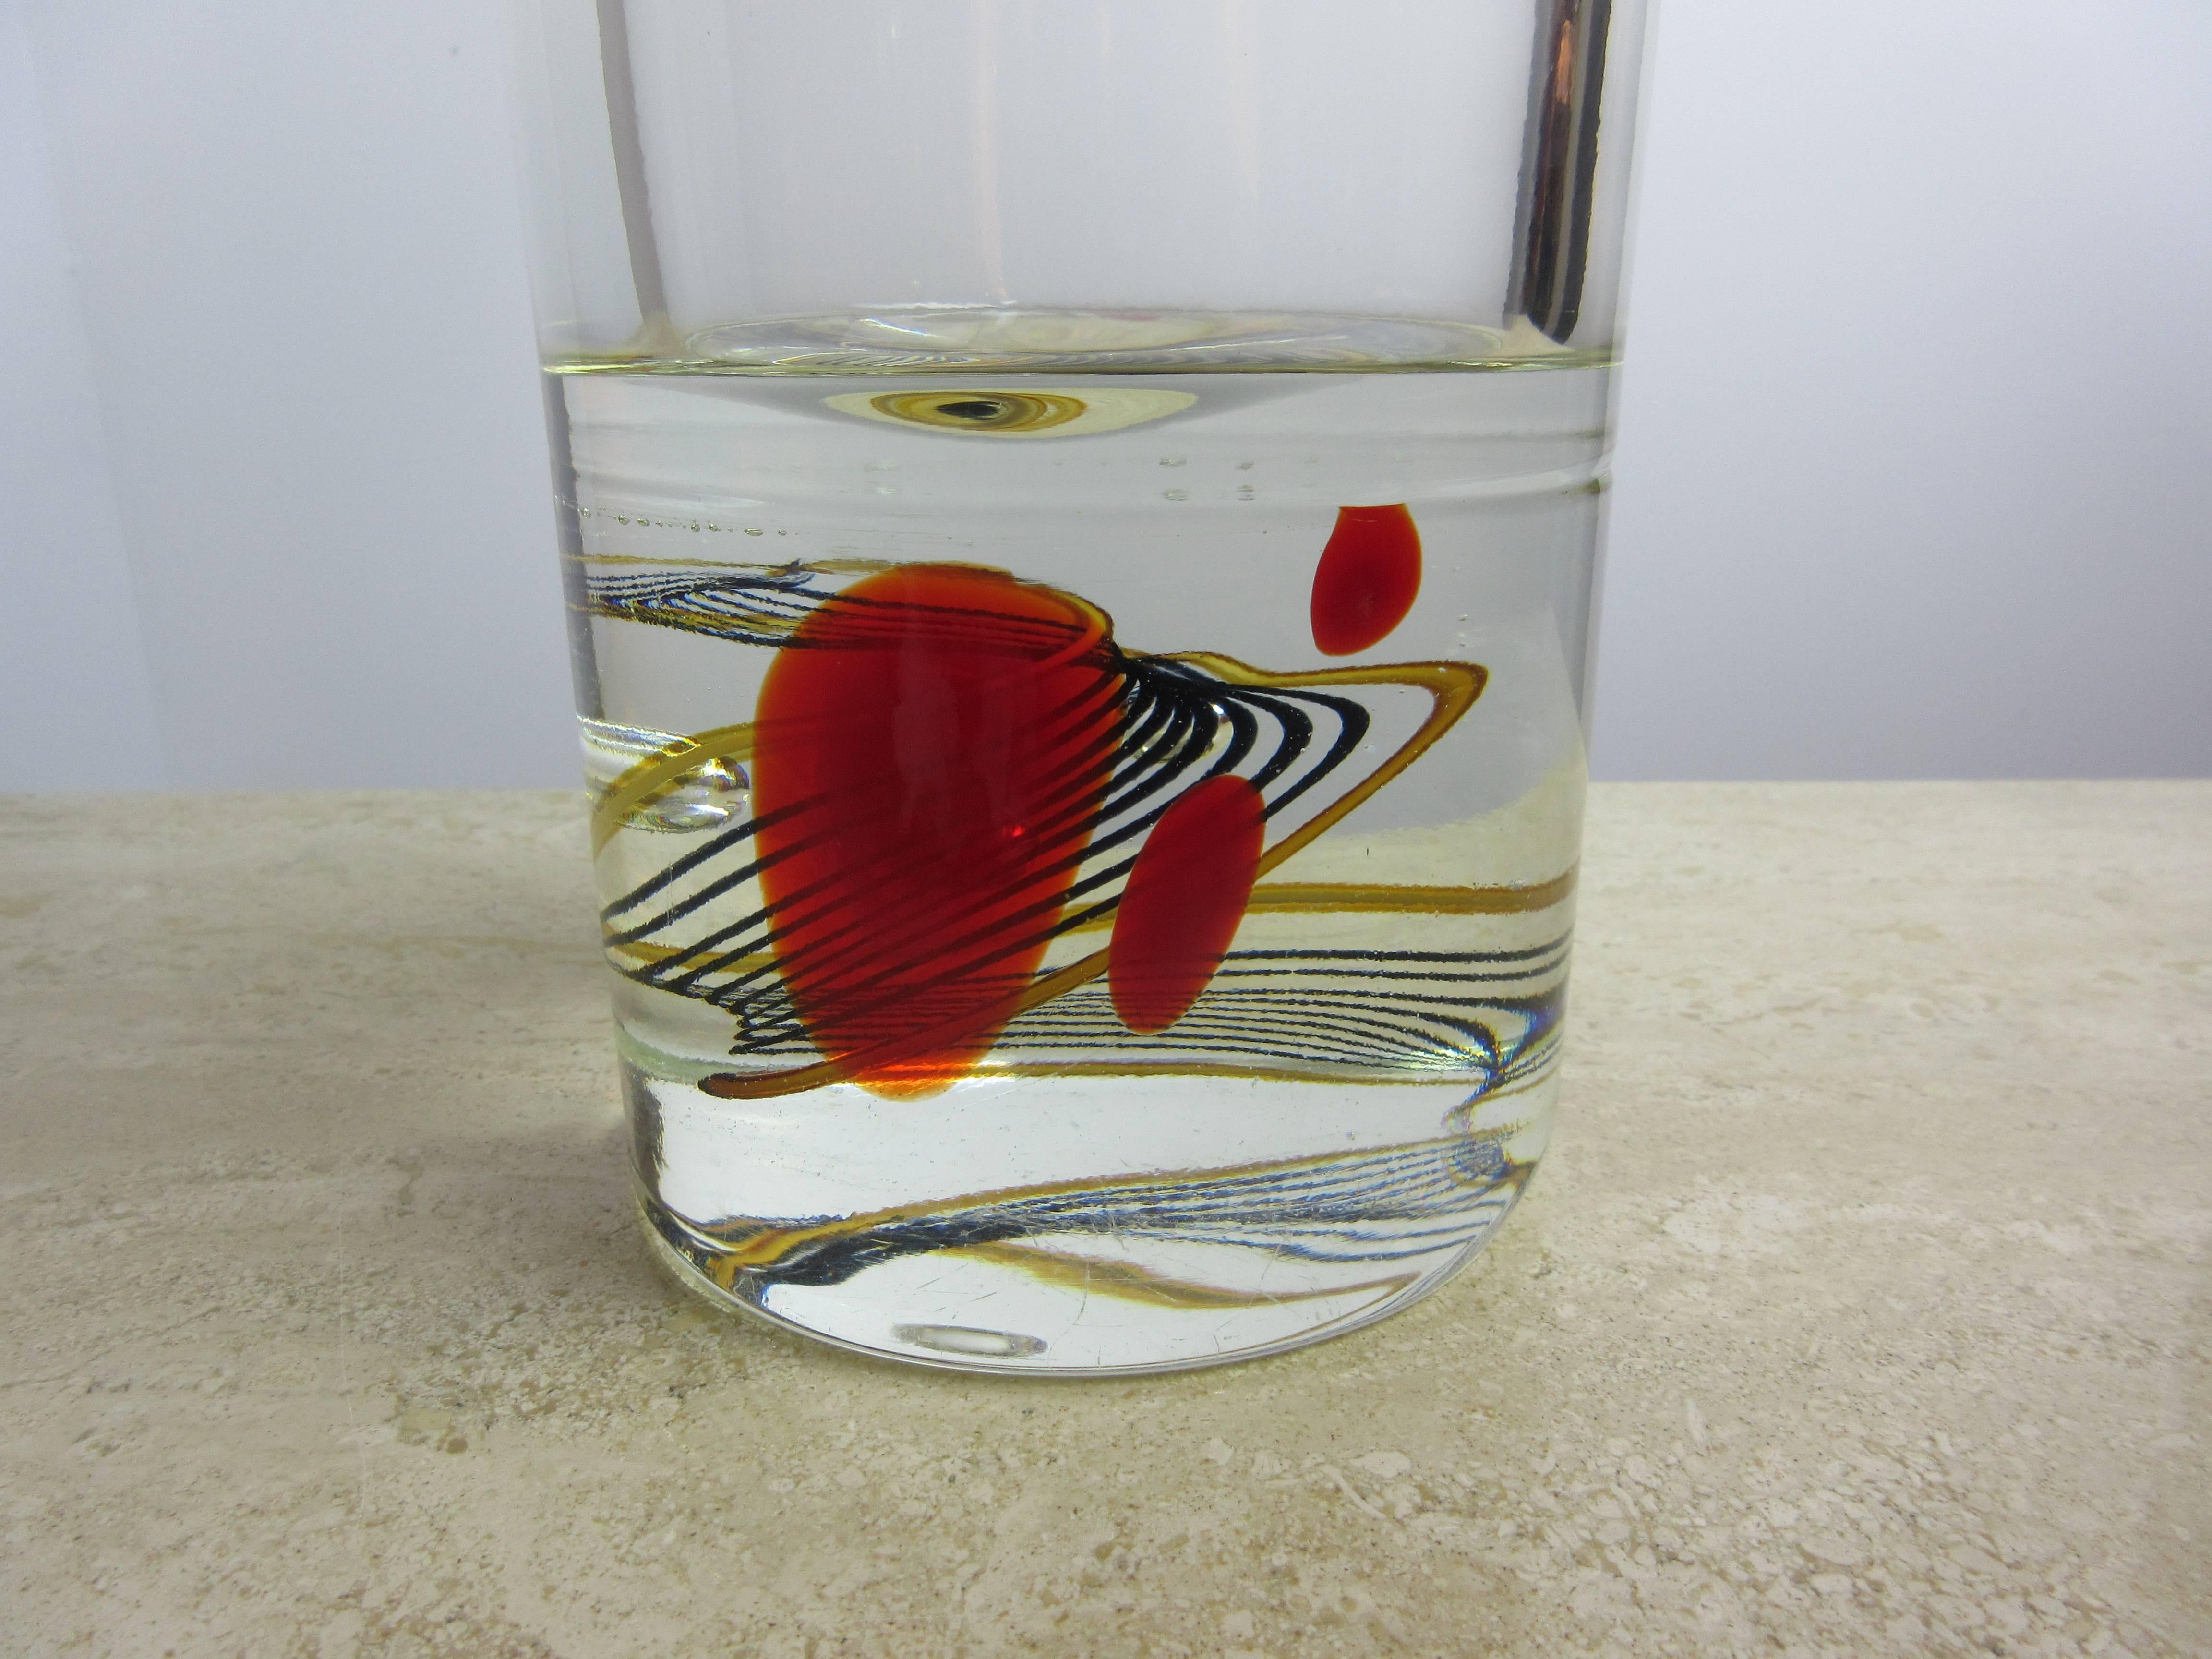 Signed signature etched bottom. Very heavy, blown glass with nice polished edge and bottom. Solid 4" bottom with black and gold swirls and off to one side three red dots! Beautiful simple form!